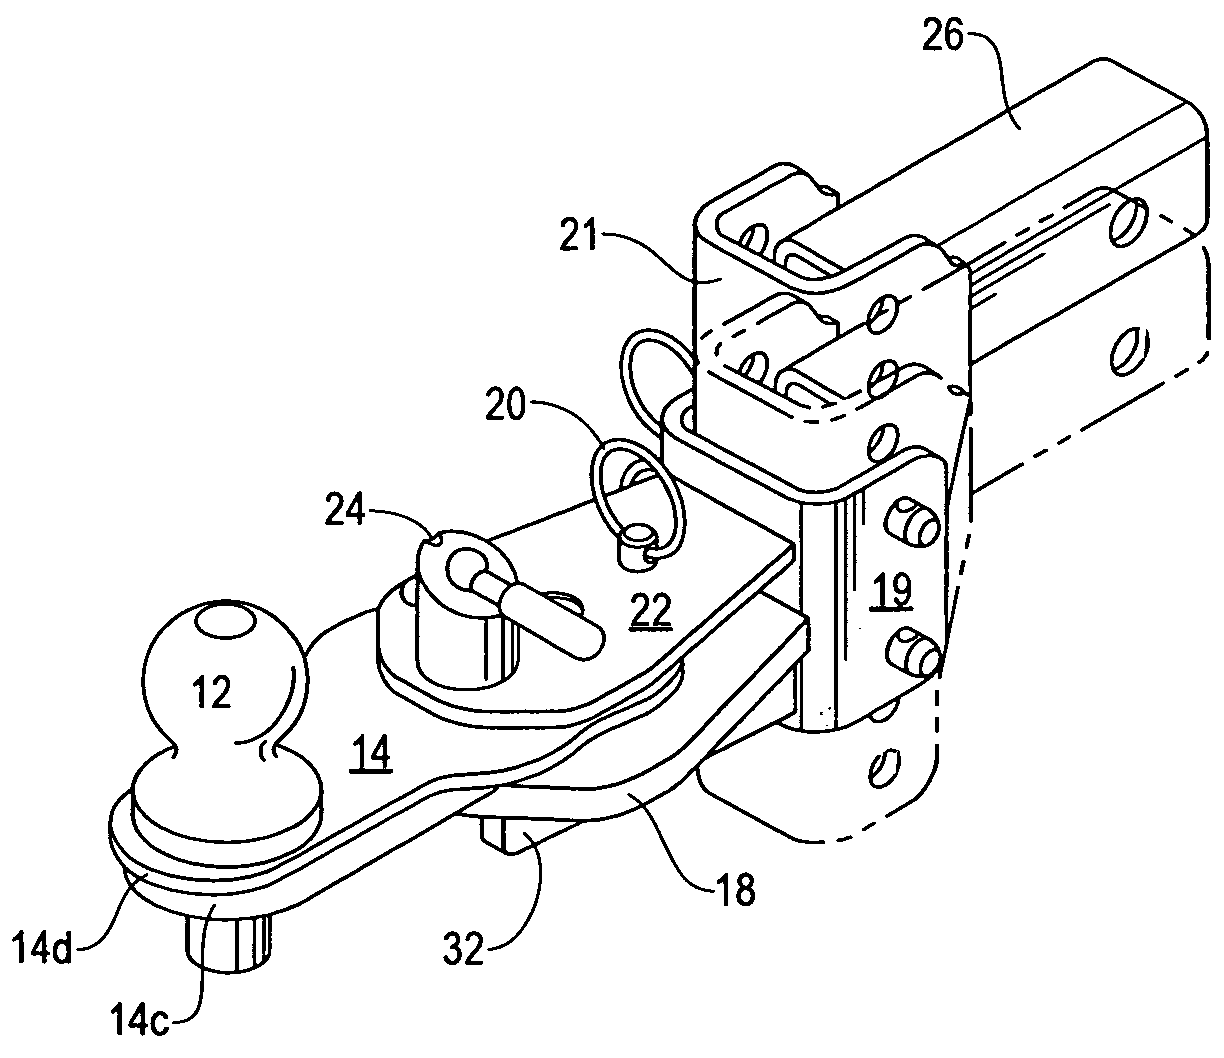 Adjustable hitch for towing